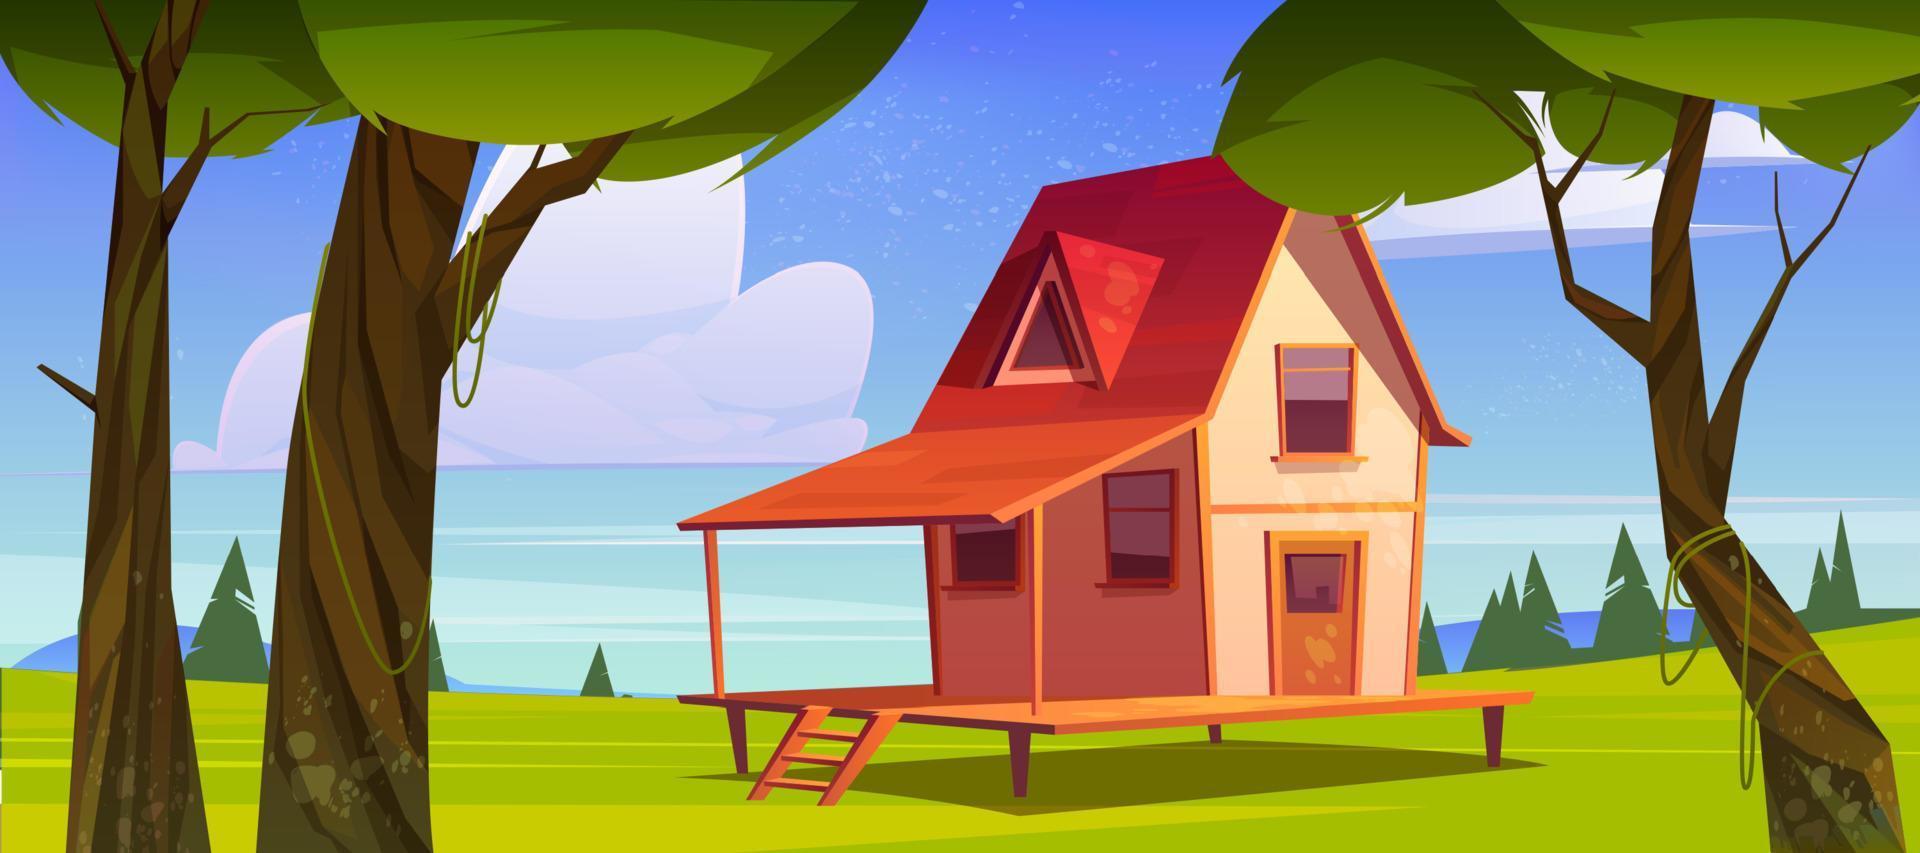 Village house on hill with green grass and trees vector